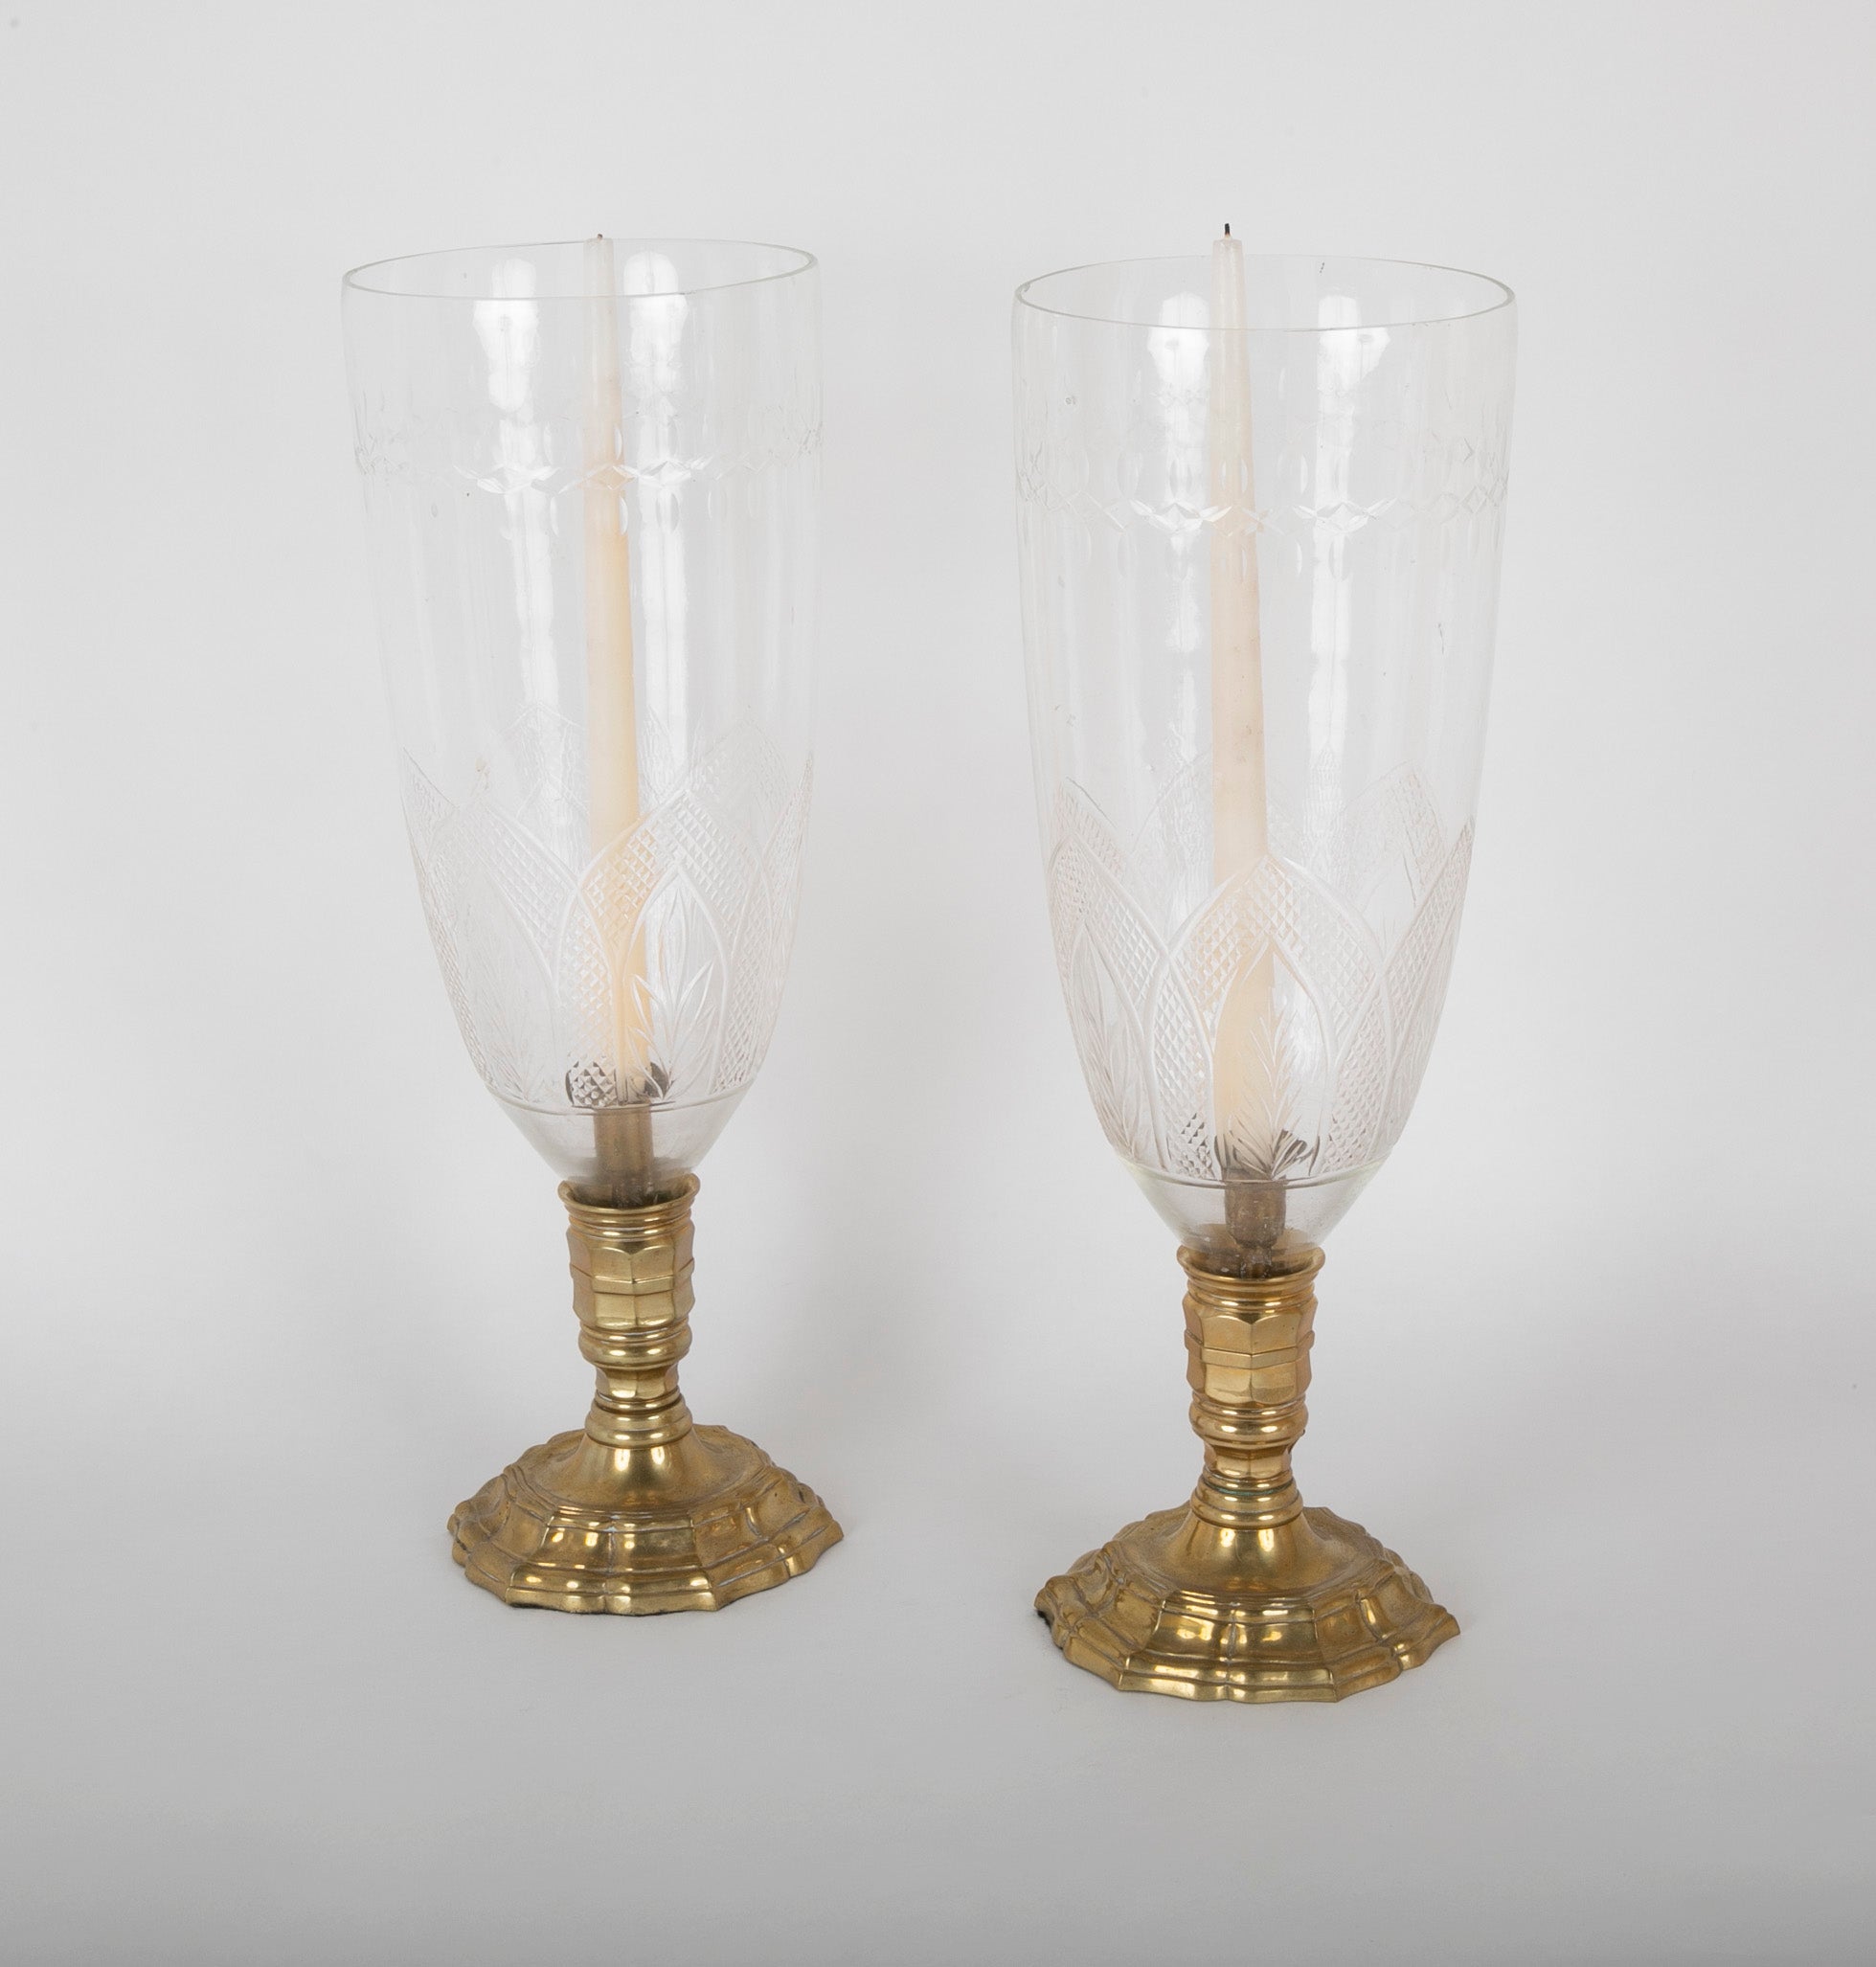 A Pair of French Bronze Photophores with Engraved Hurricane Shades